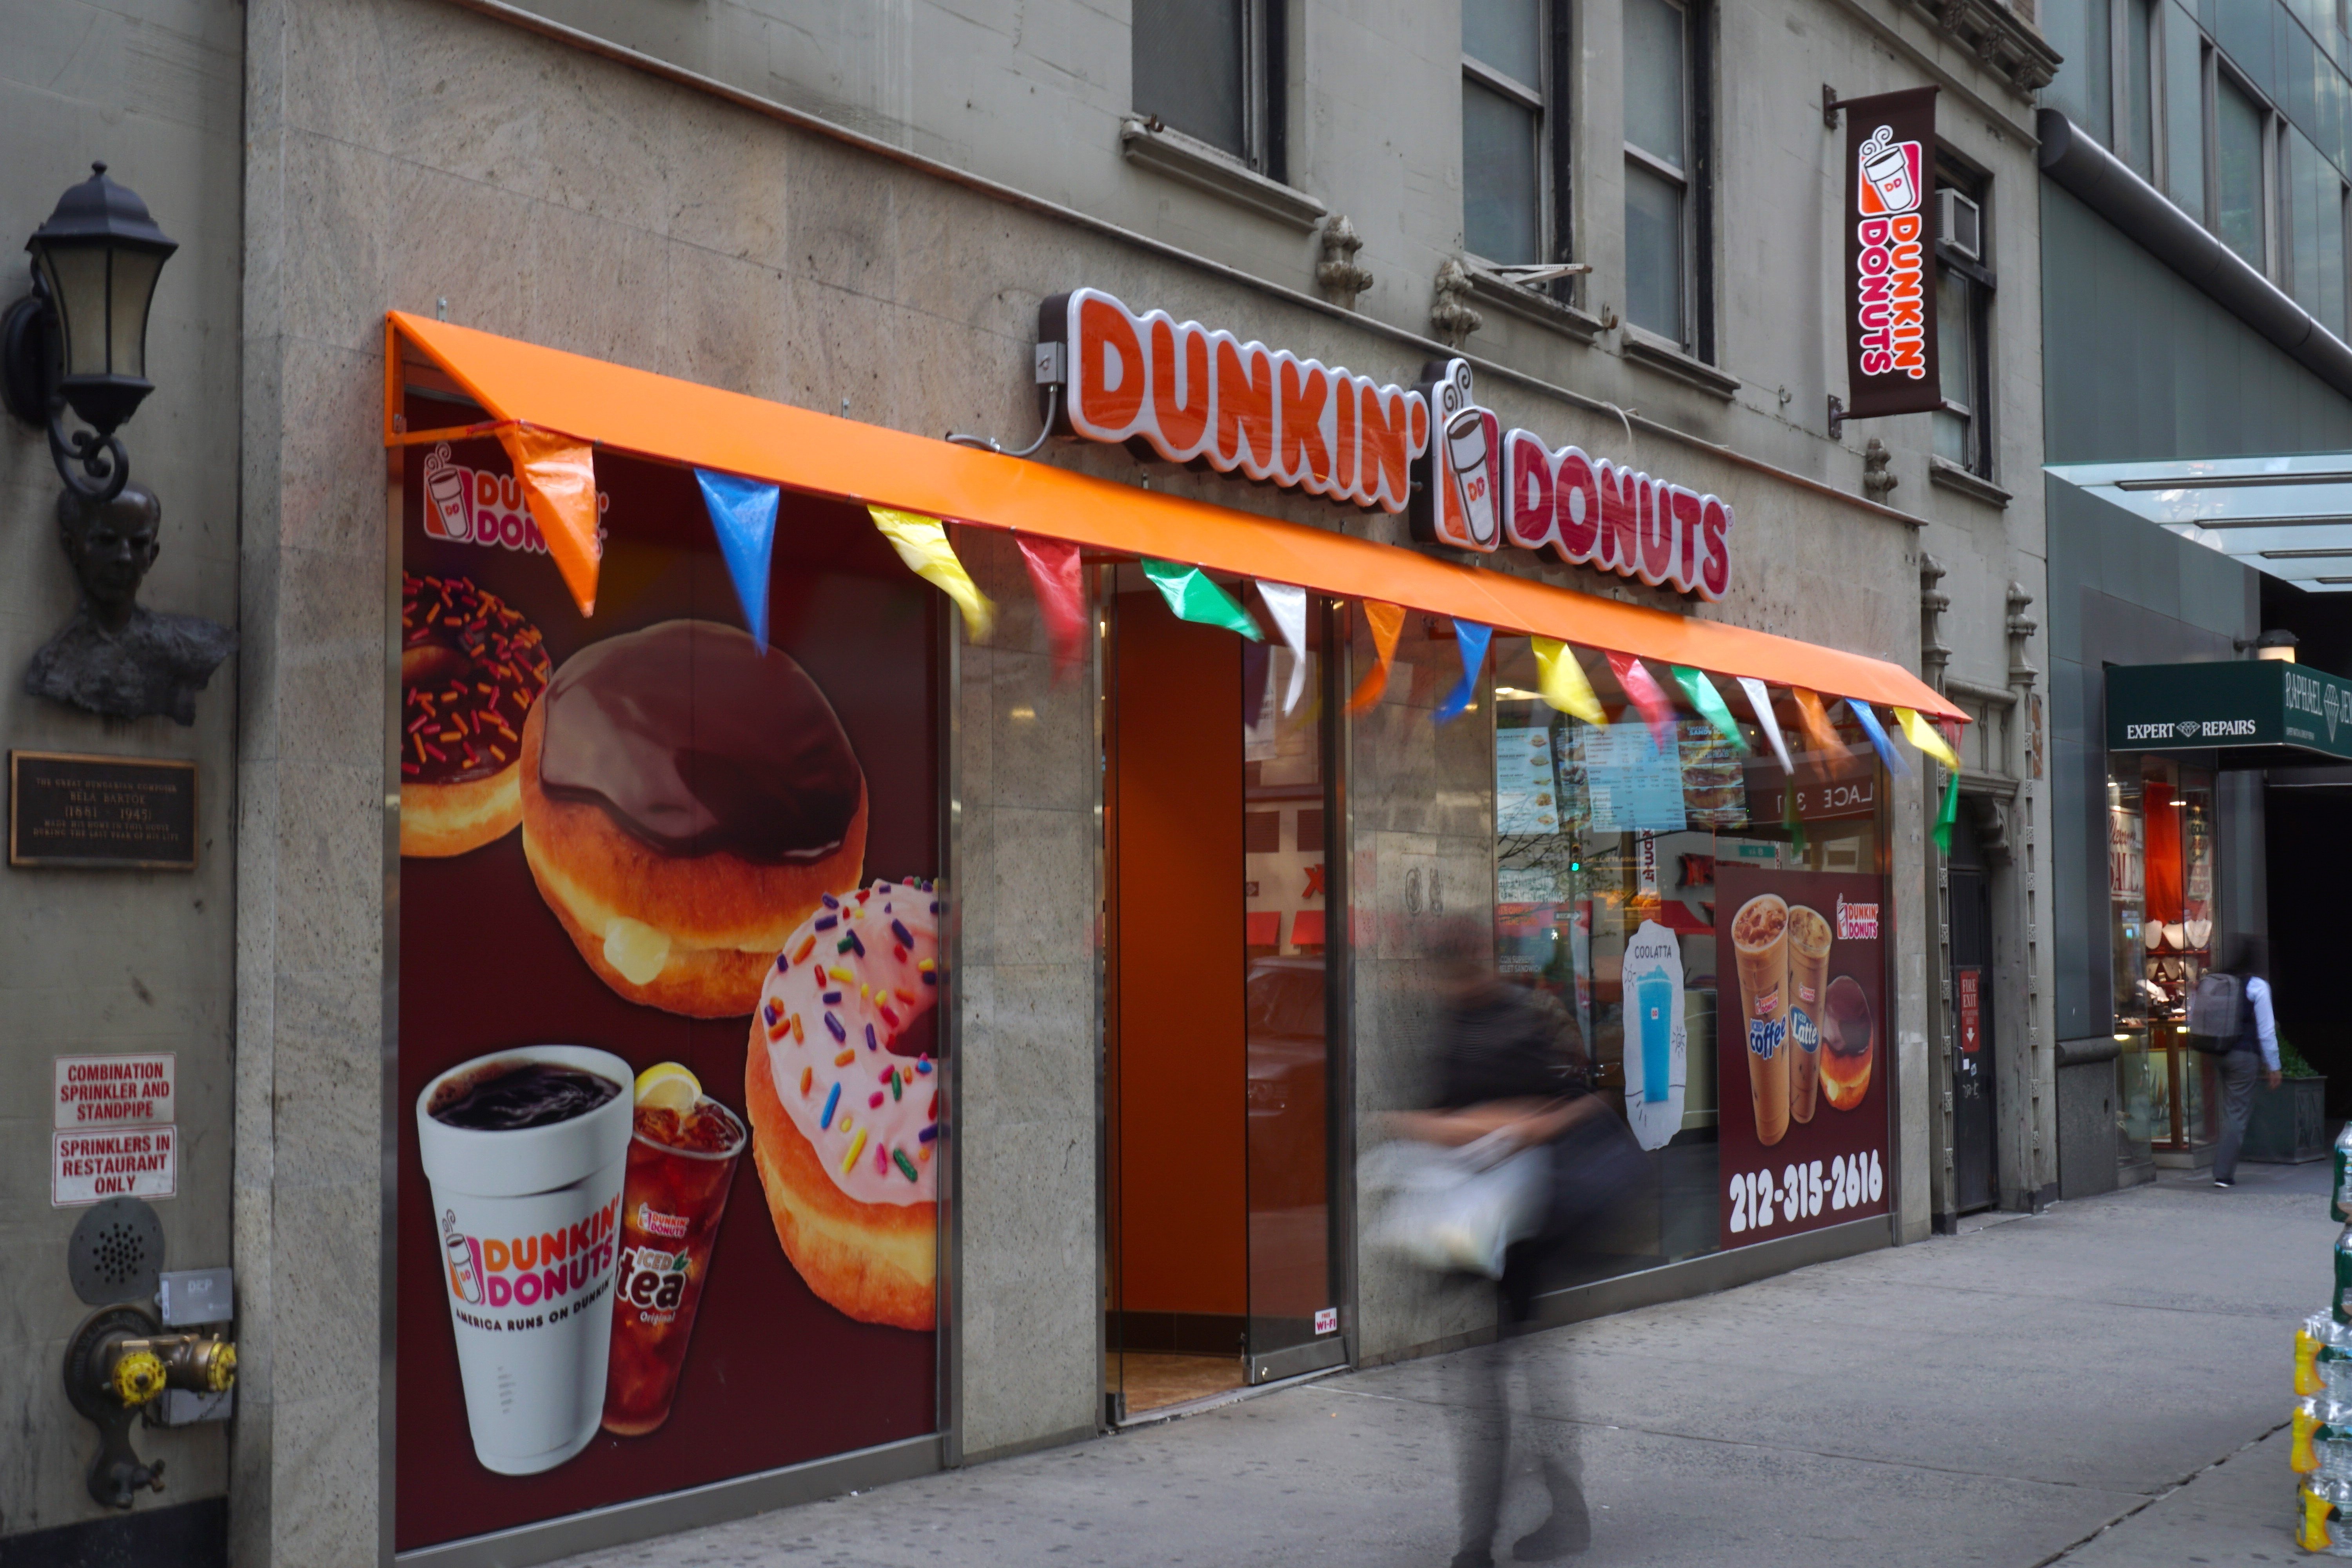 Food Service Market Research: Dunkin' Donuts Avoids Being Dunked On